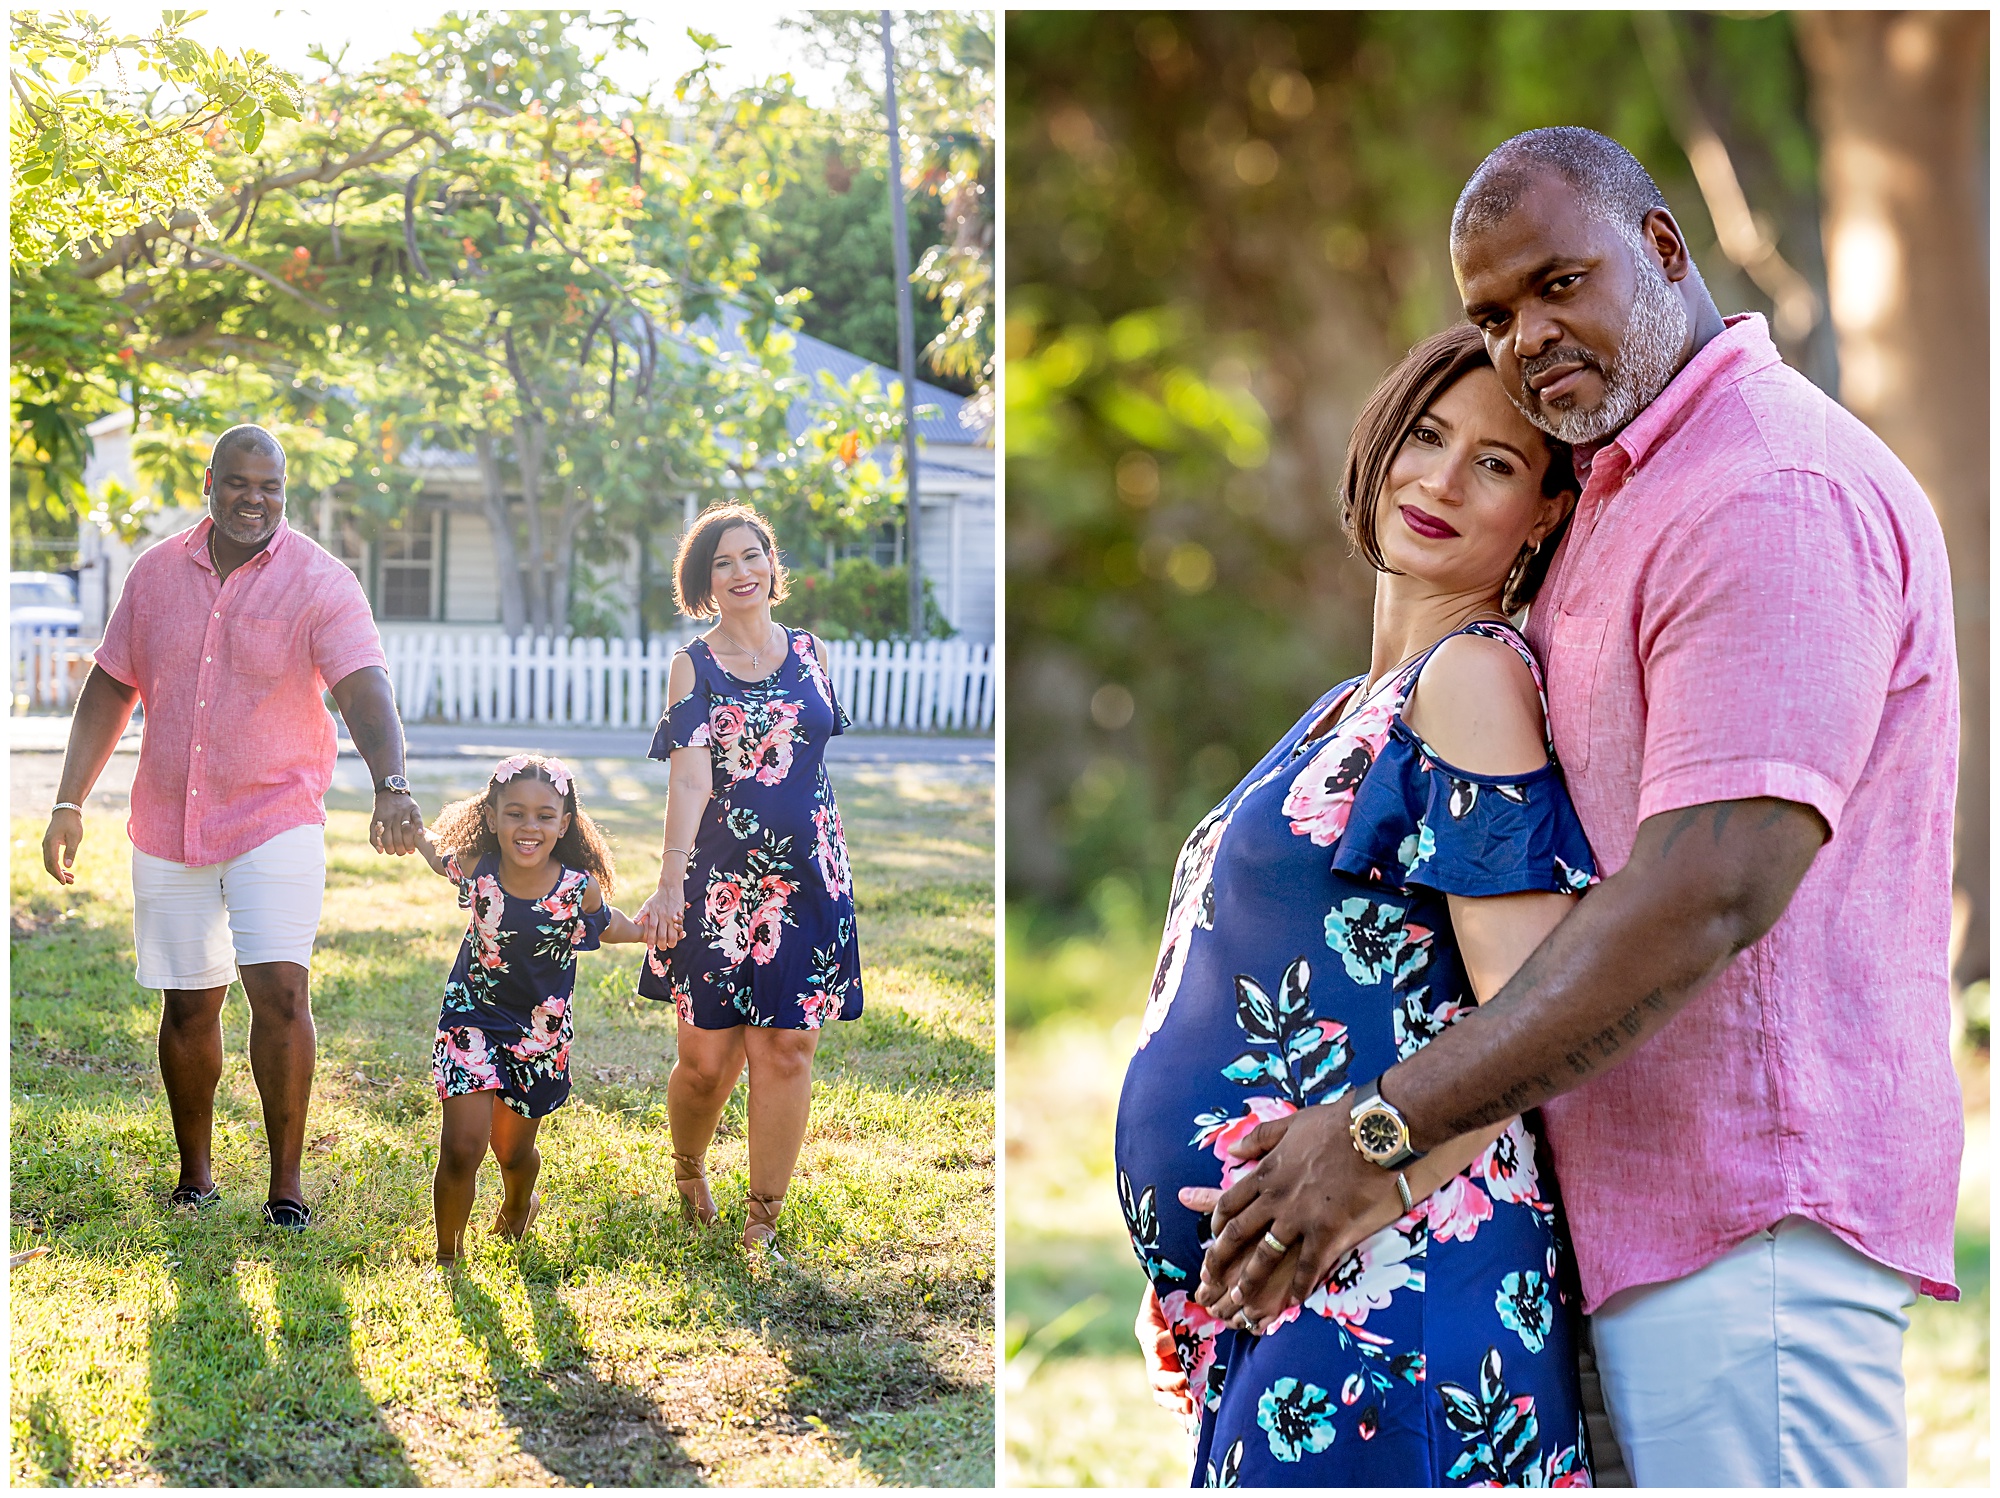 maternity session always needs to include some fun family shots